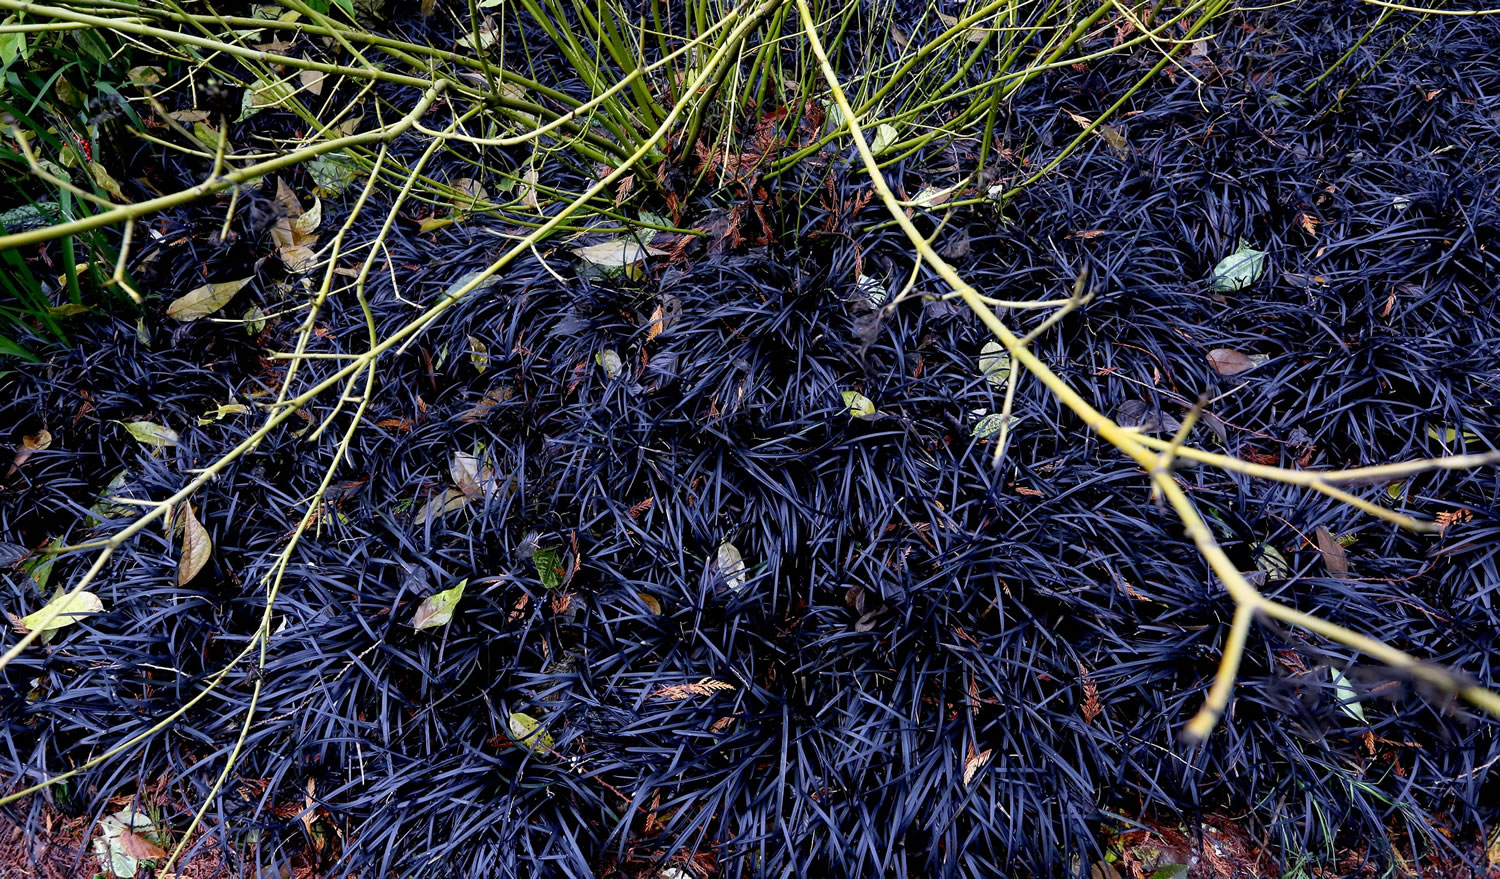 Mondo grass makes a bold groundcover statement with its black, purplish colors.